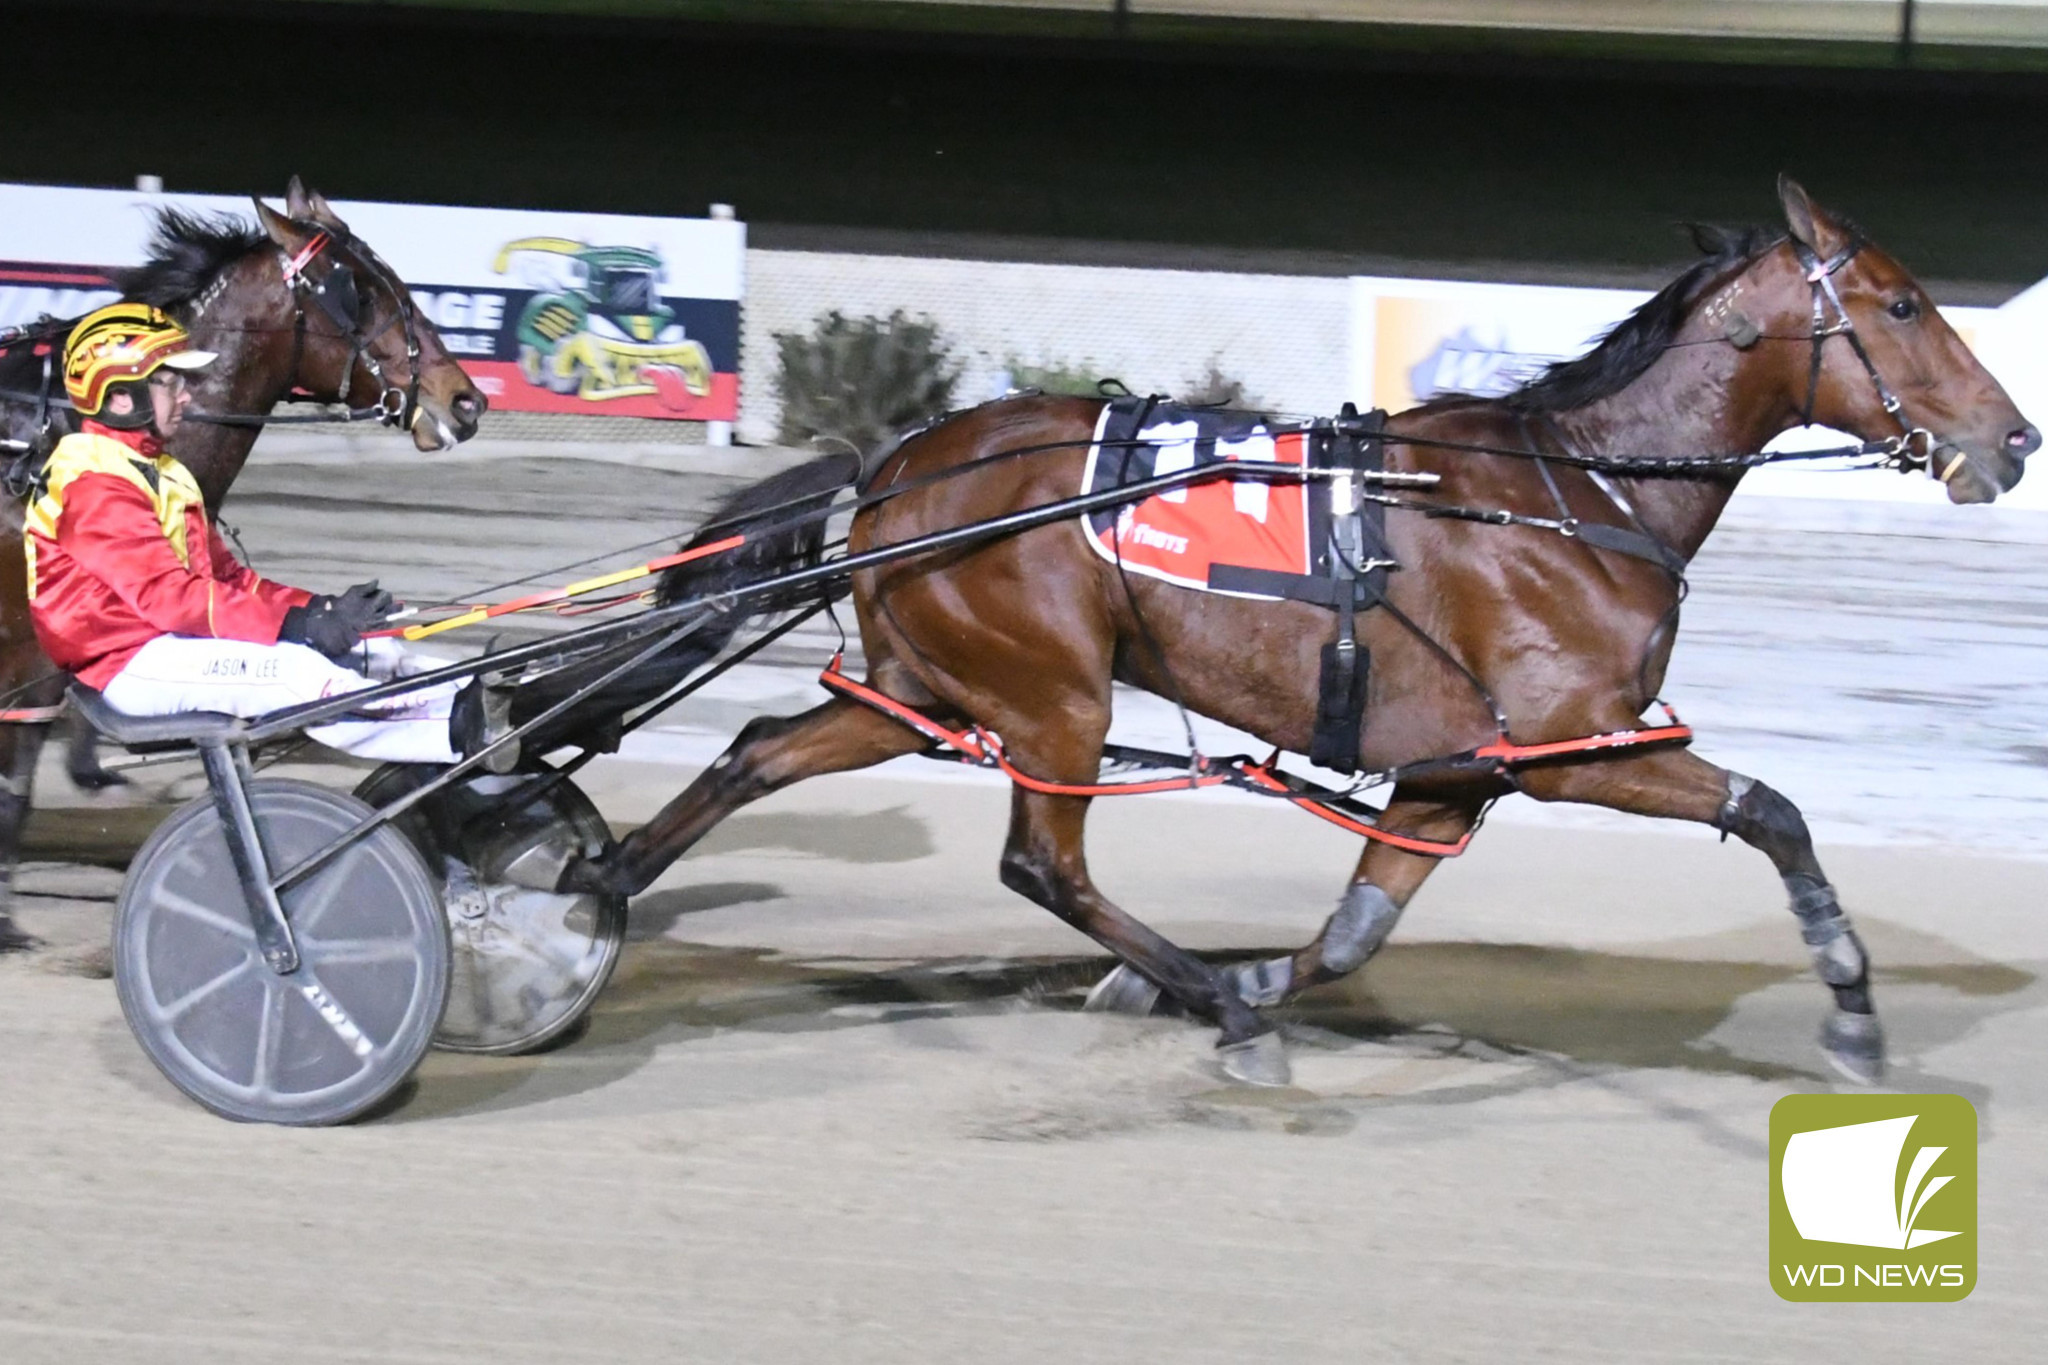 Winner of race 4, the WDNews Publications Pace, Keayang Tokyo (photo courtesy of Claire Weston Photography).